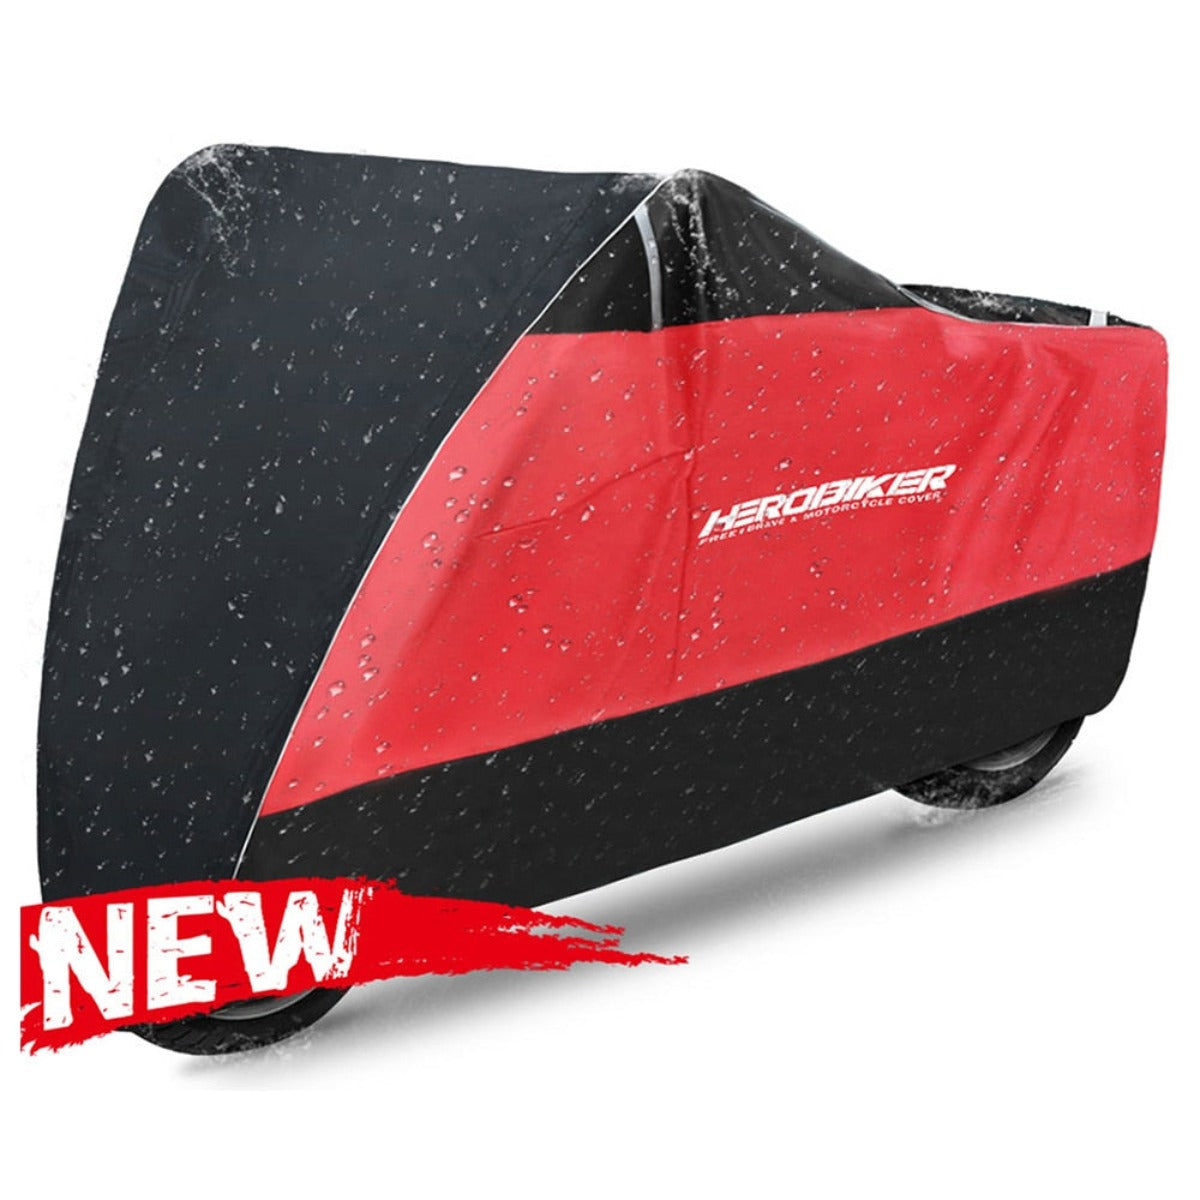 This red and black Waterproof Protective Motorcycle Cover provides protection against weather damage.